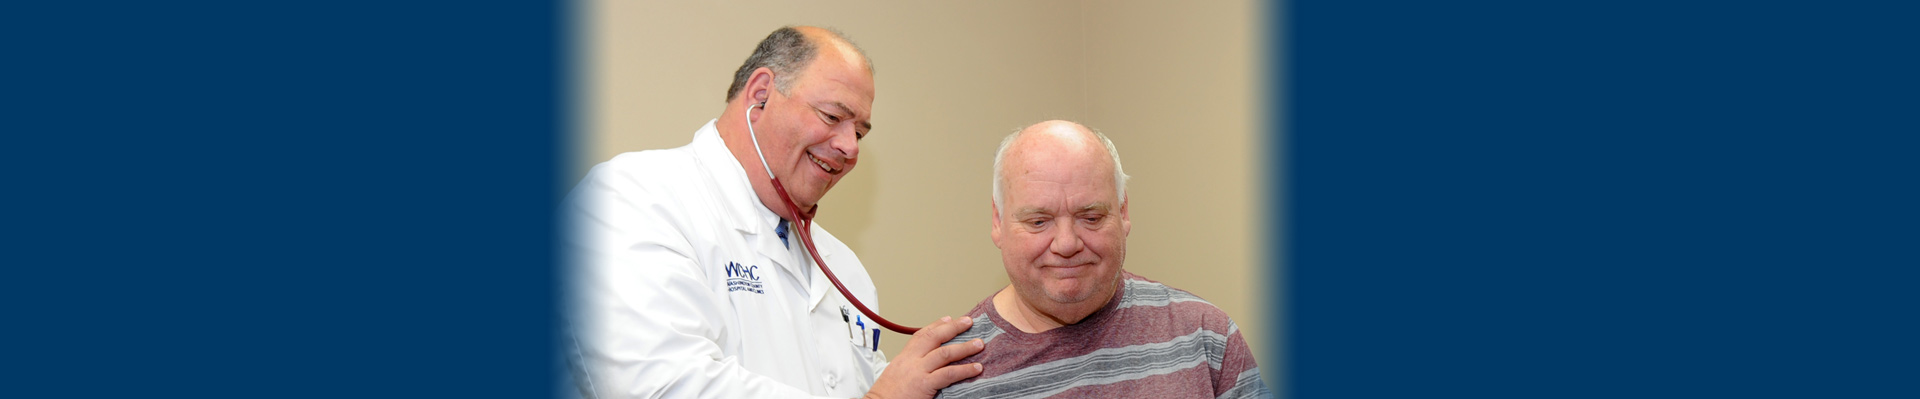 Banner picture of a male Physician checking an older male patient's breathing with a stethoscope.